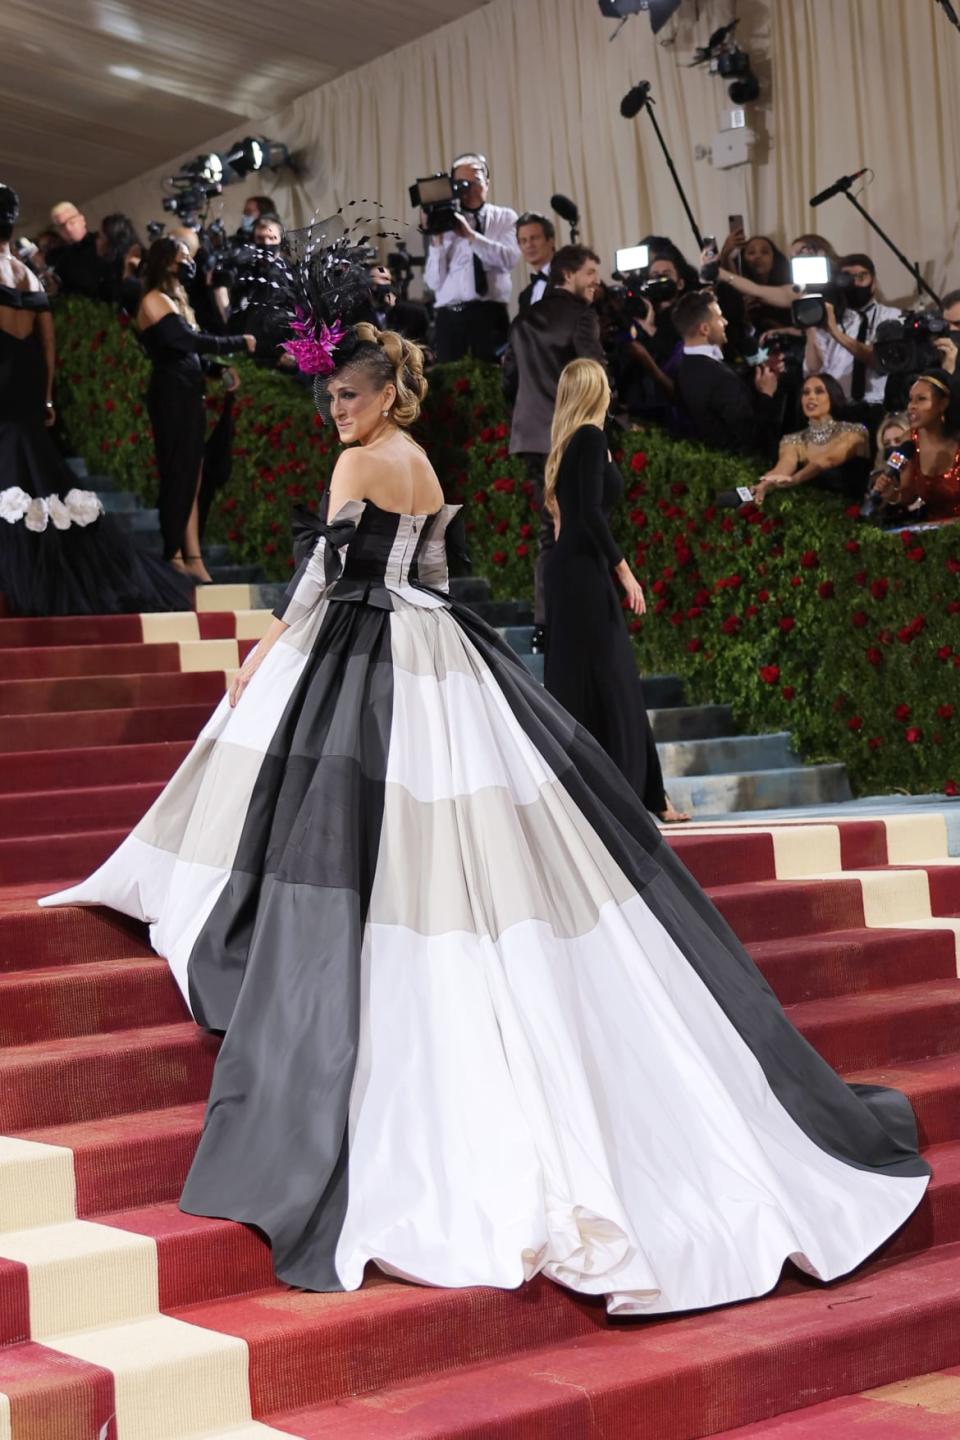 <div class="inline-image__caption"><p>God, Sarah Jessica Parker is so refreshing. The huge bustle screams Gilded Age but the checkered pattern is thoroughly modern, and she tops off the Christopher John Rogers confection with a feathered hat that’d fit right in at the Vanderbilt Ball.</p></div> <div class="inline-image__credit">Mike Coppola/Getty</div>